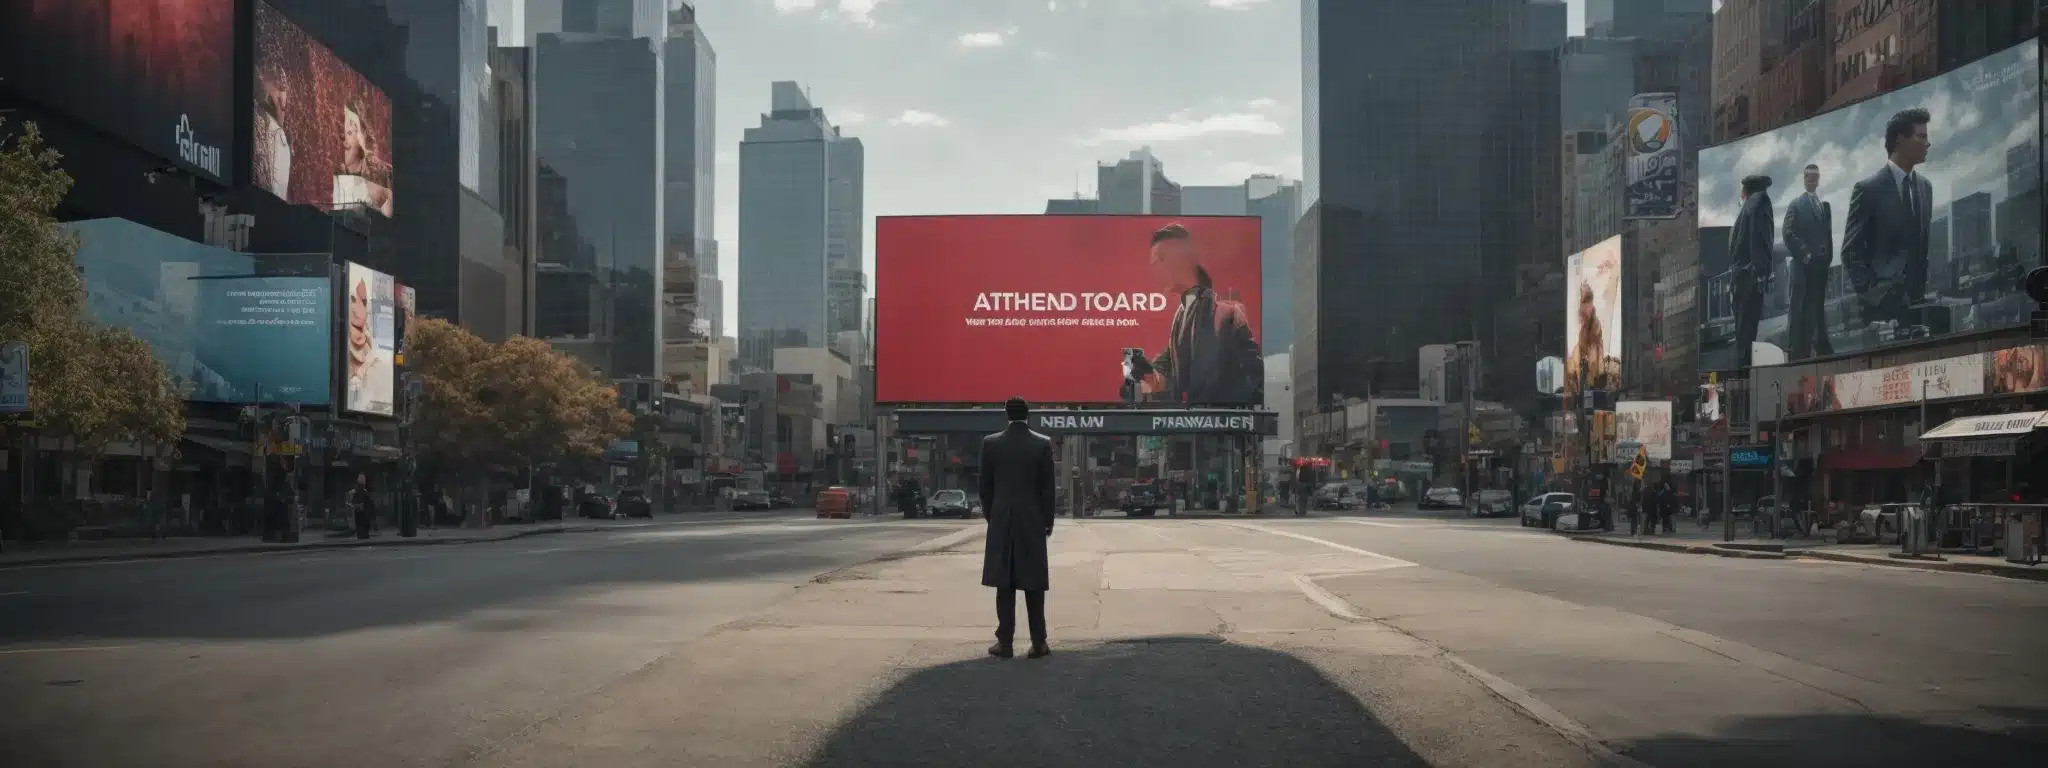 A Strategist Stands Before A Collection Of Billboards Analyzing Contrasting Advertising Campaigns.